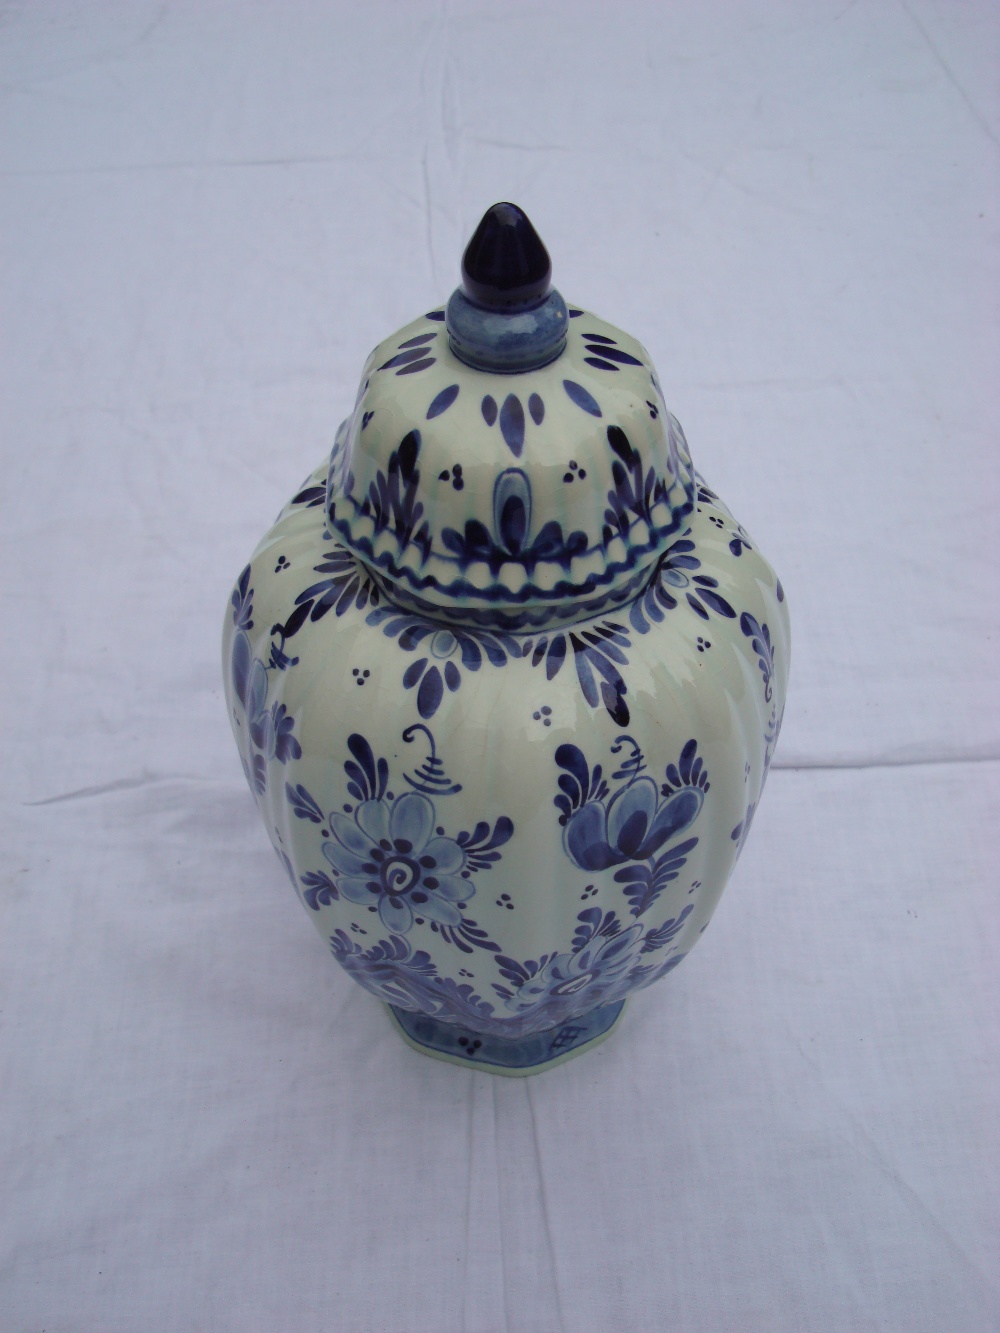 A Delft blue and white hand painted vase with lid.